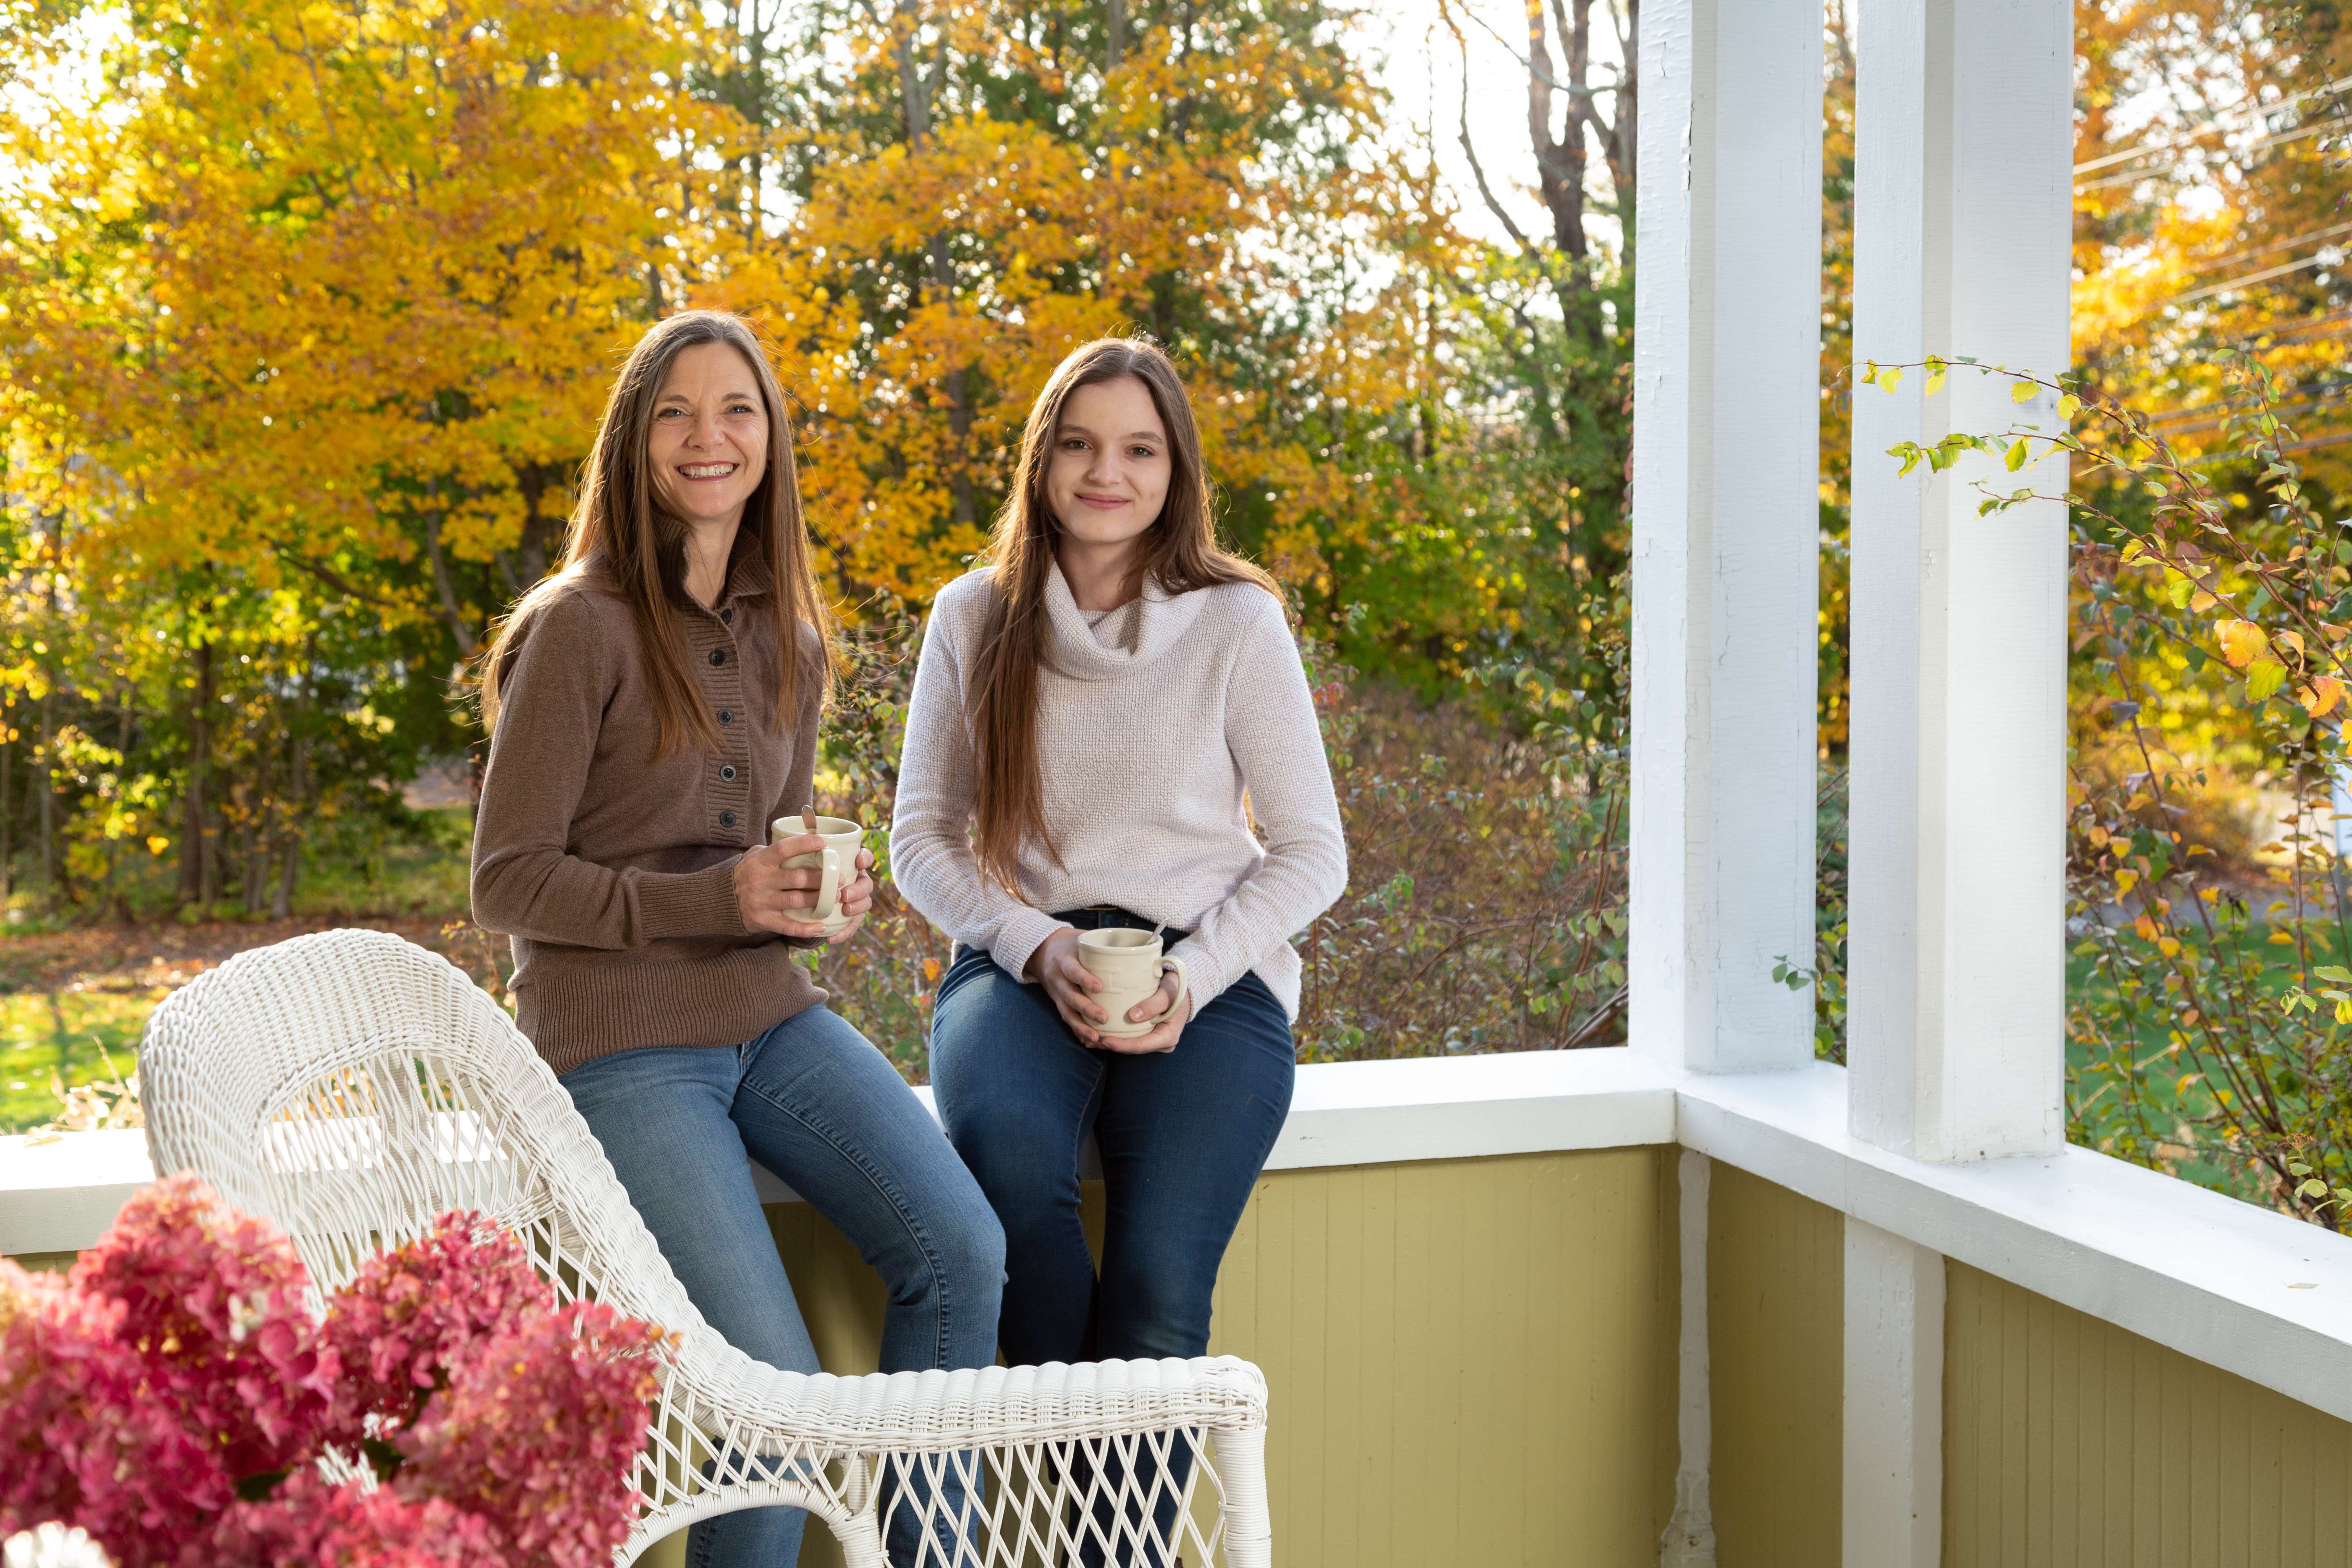 2 people smiling on porch